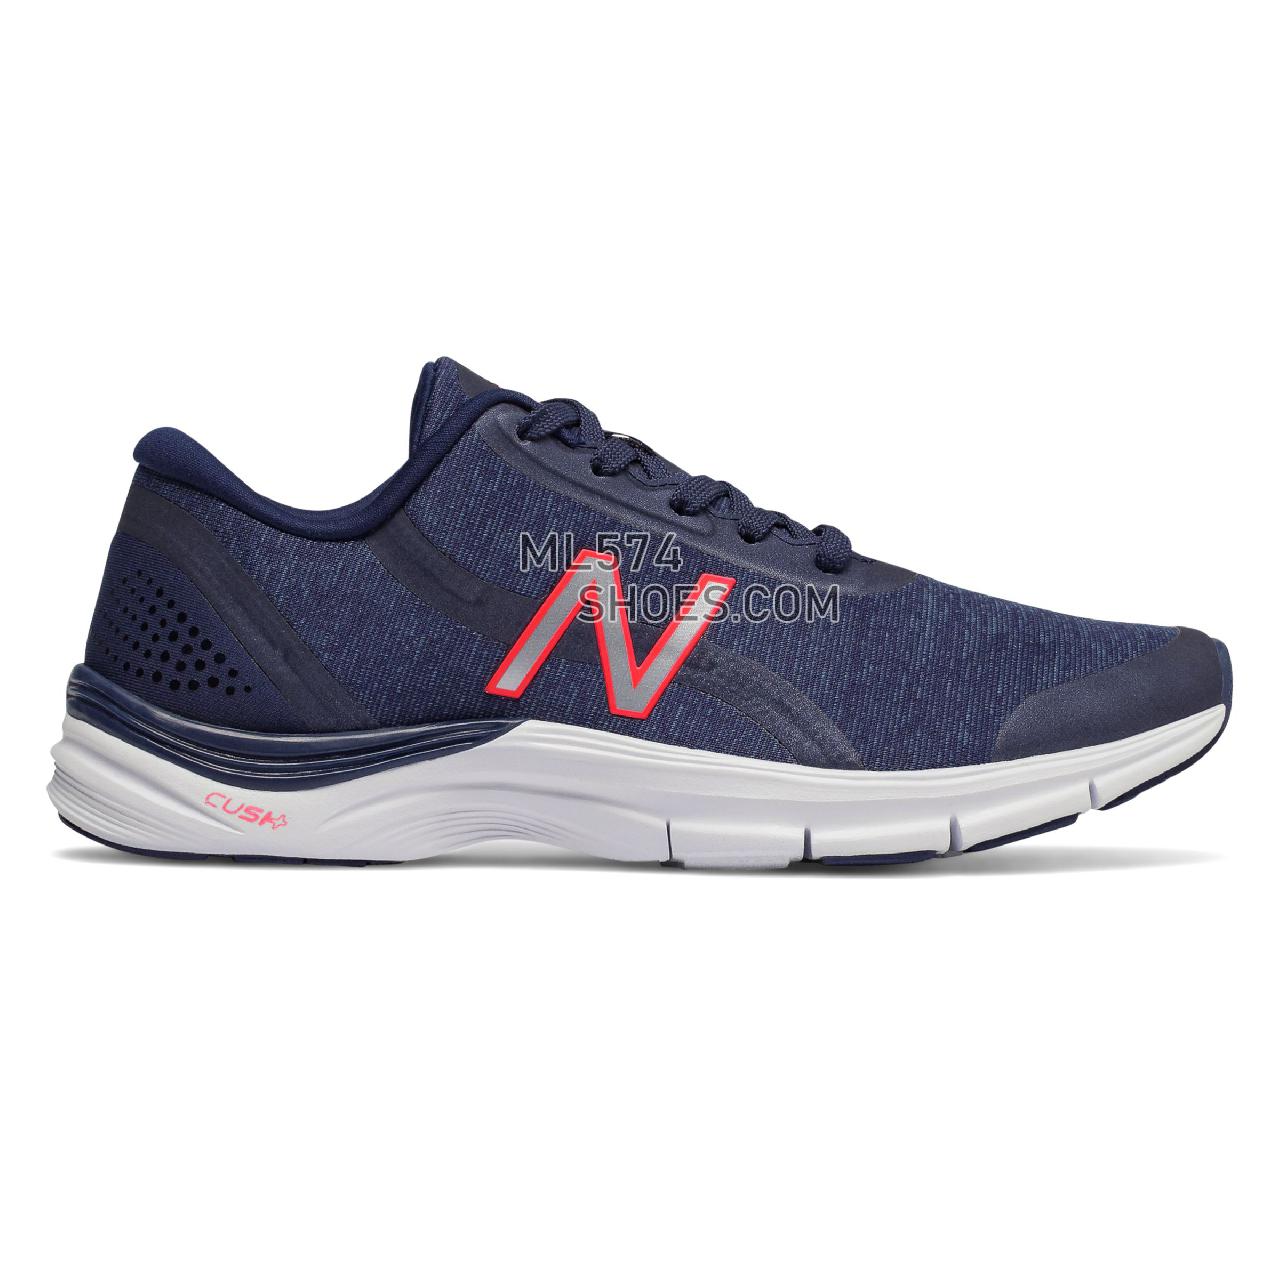 New Balance 711v3 Mesh Trainer - Women's 711 - X-training Pigment with Pink Zing - WX711SB3